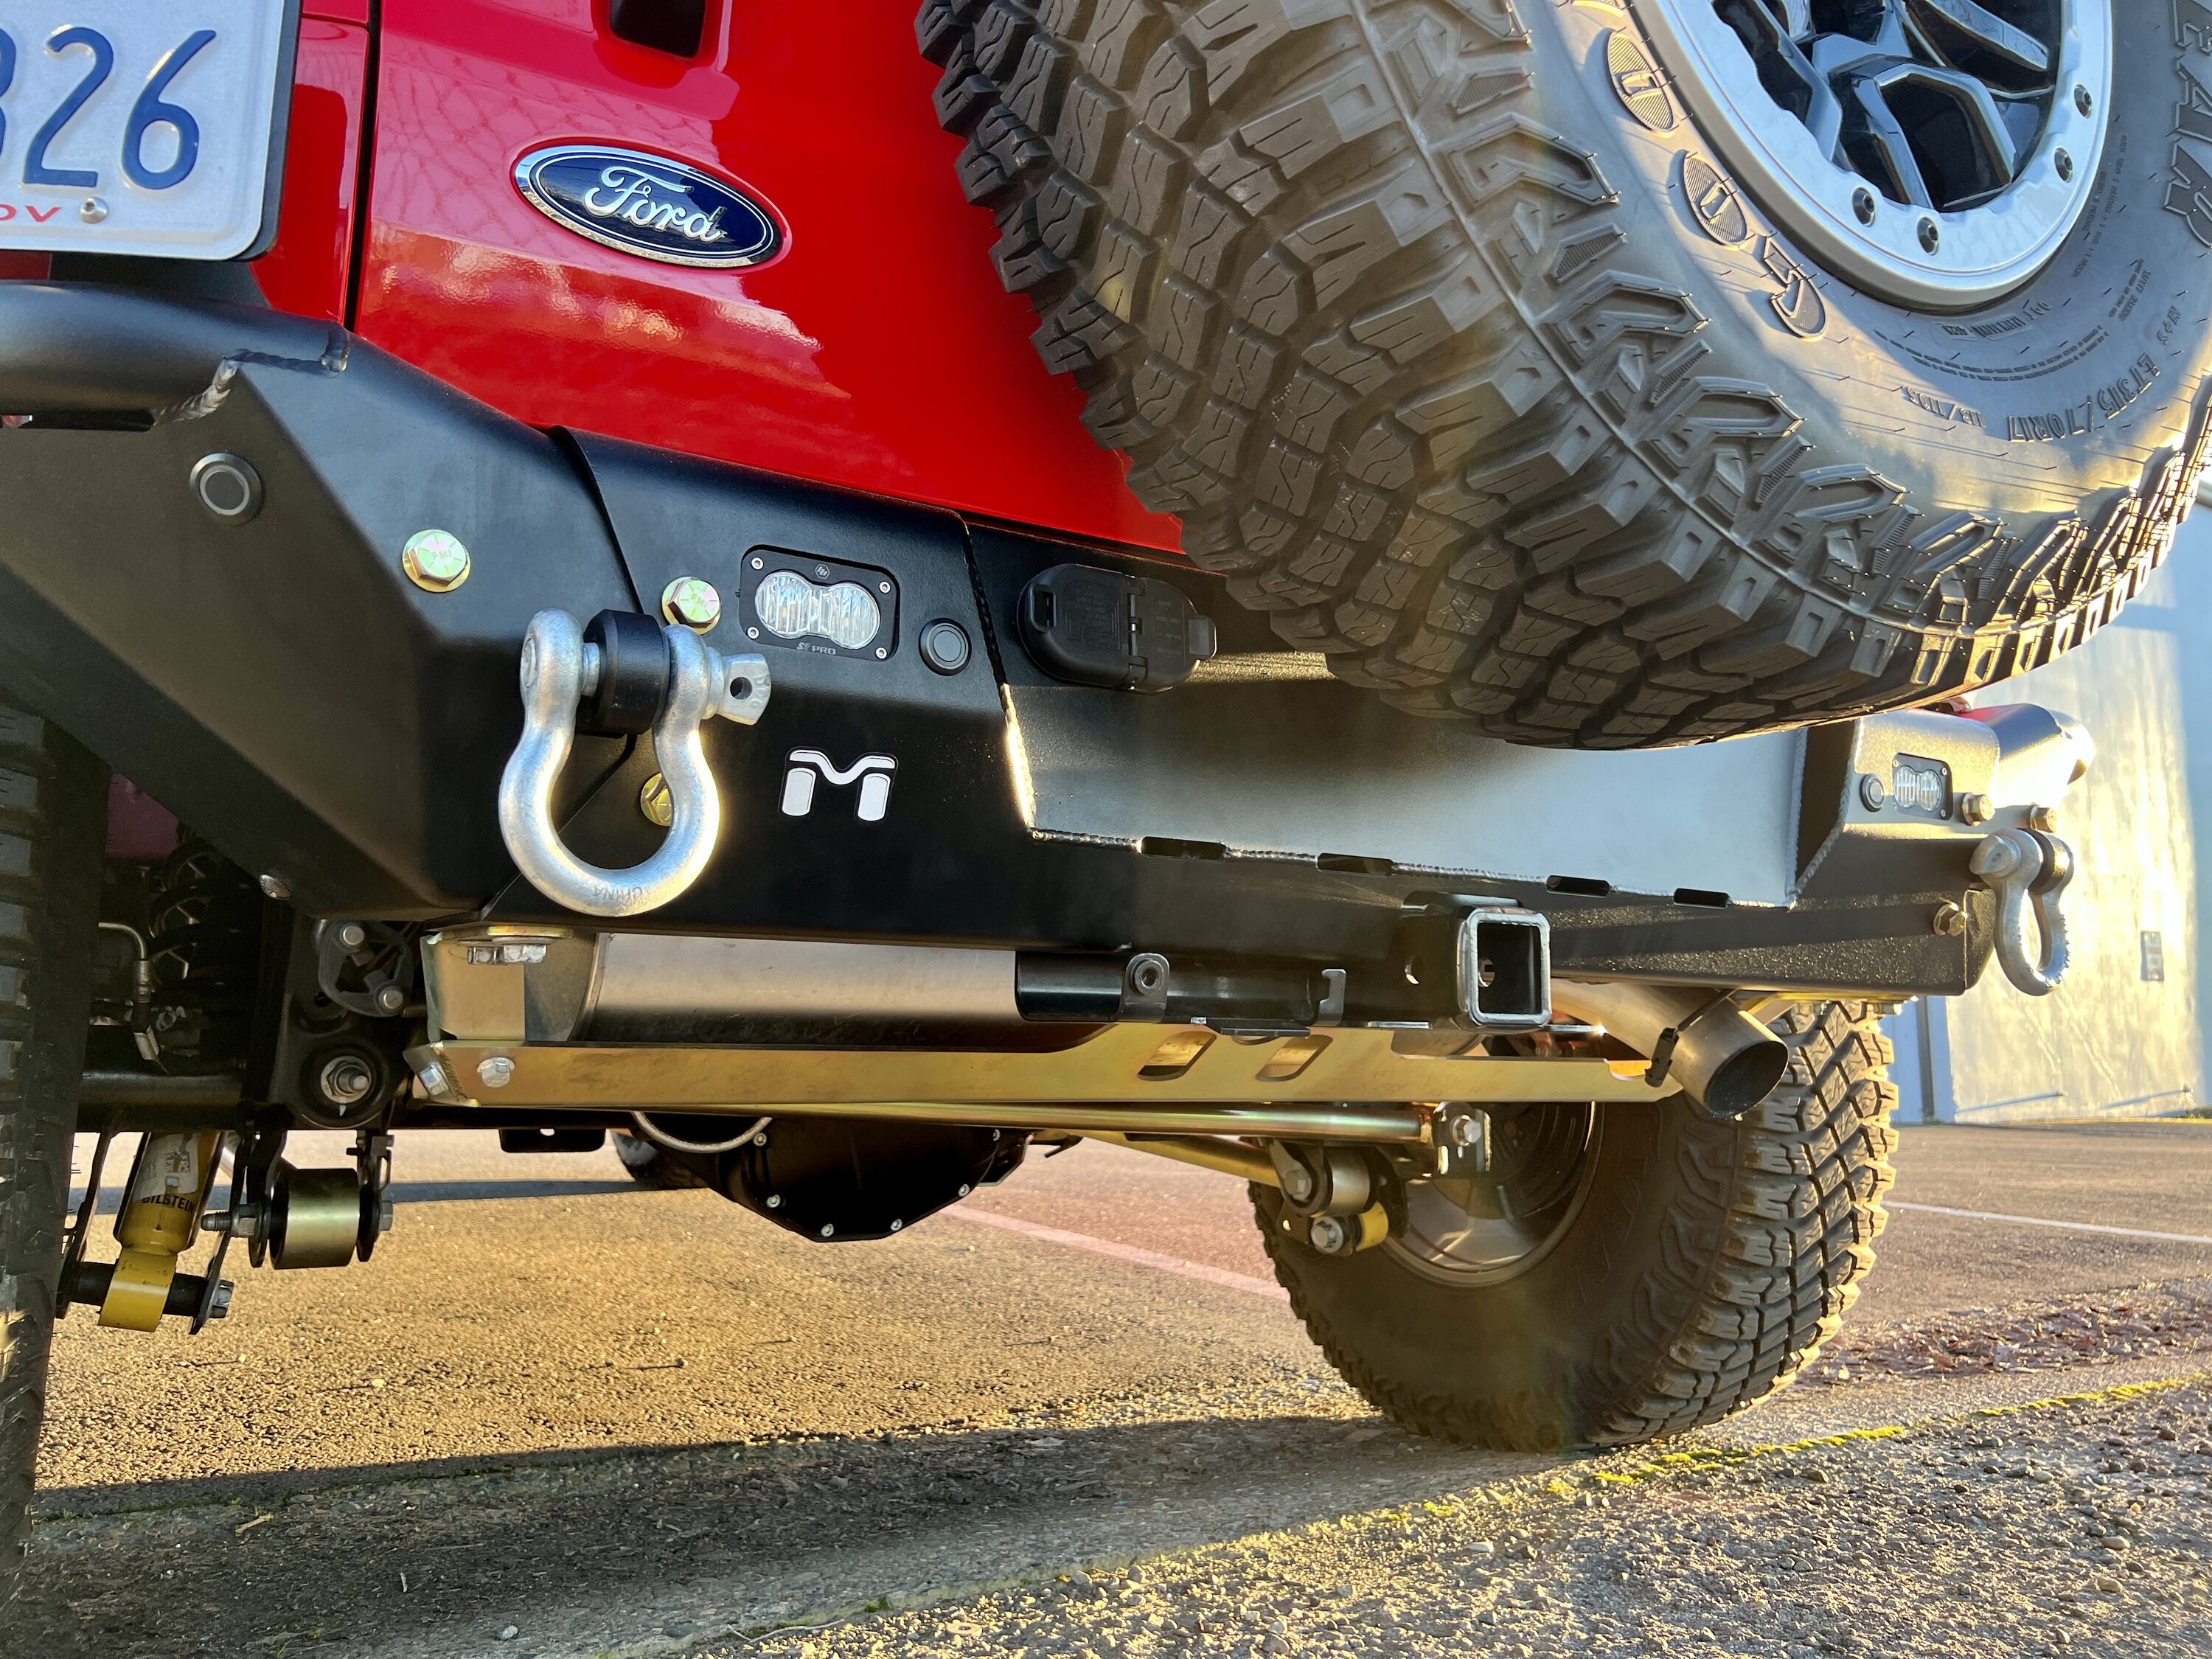 Ford Bronco Metalcloak Front & Rear Bumpers for Ford Bronco Now Available! IMG_9671